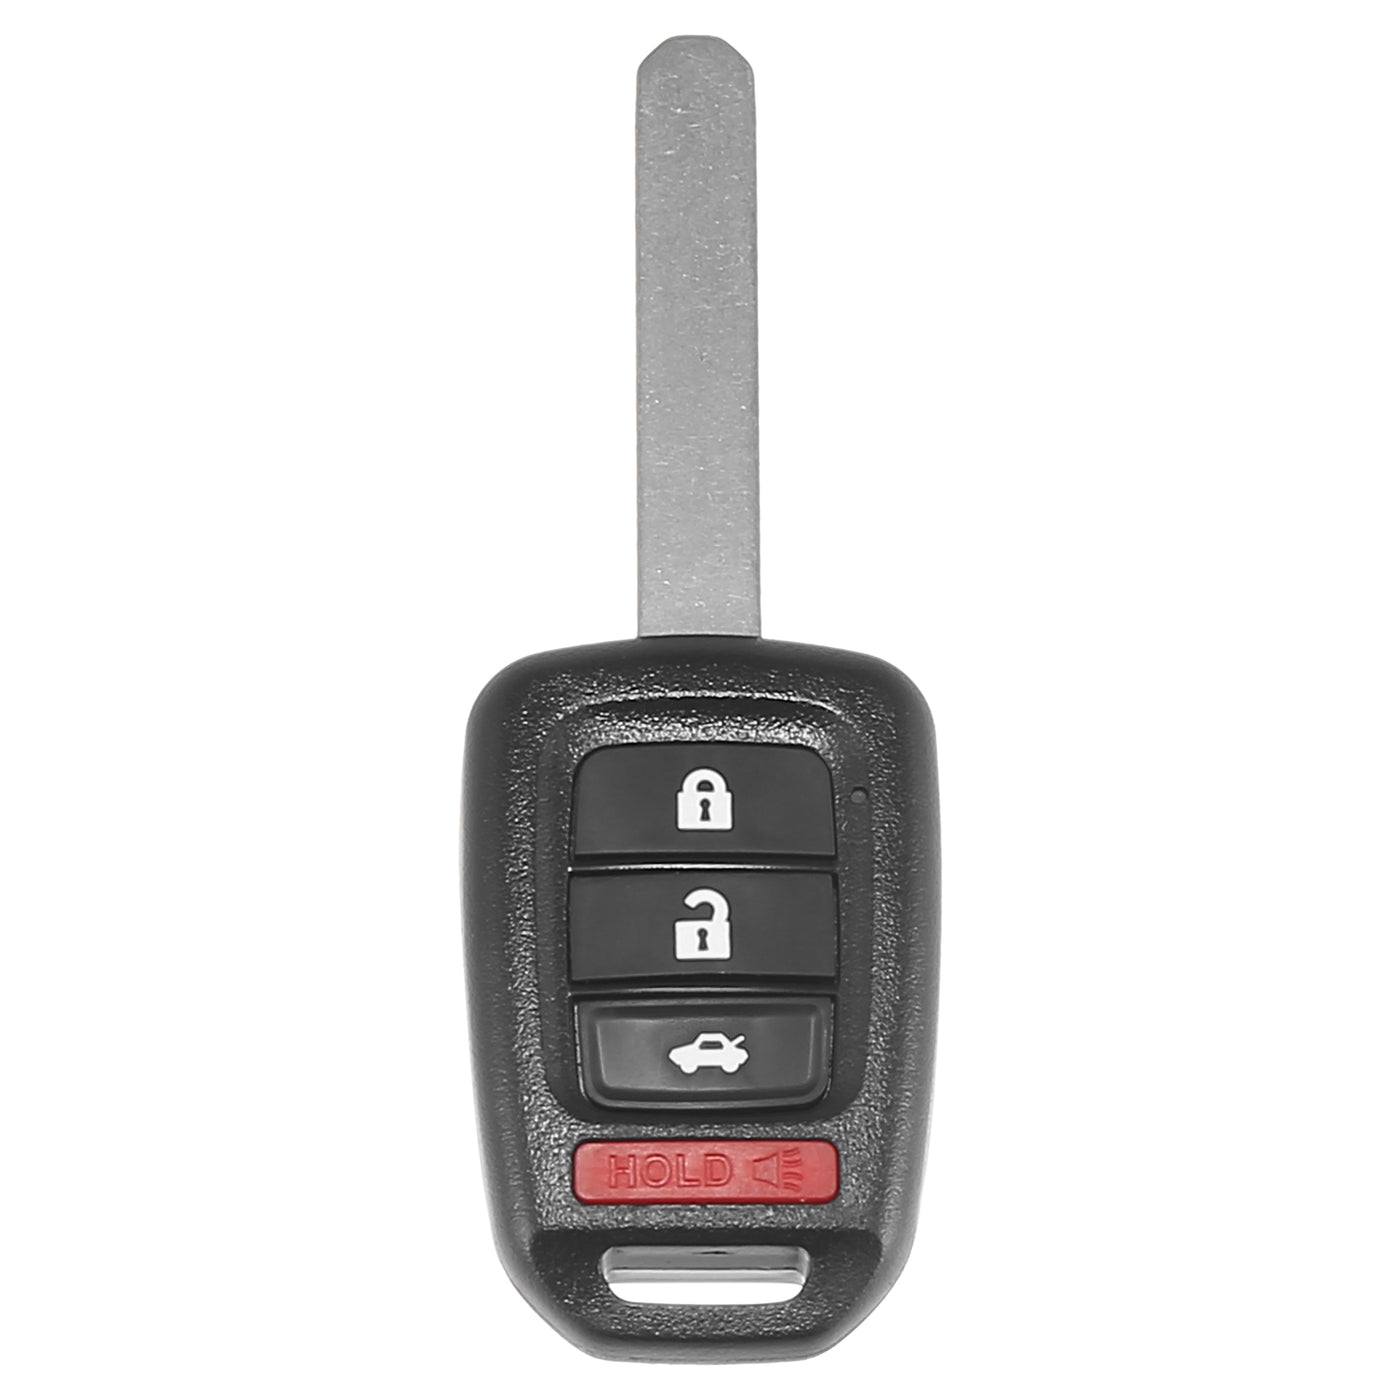 X AUTOHAUX 313.8MHz MLBHLIK6-1T Replacement Smart Proximity Keyless Entry Remote Key Fob for Honda Accord Sport LX Civic 2013-2015 4 Buttons 46 Chip